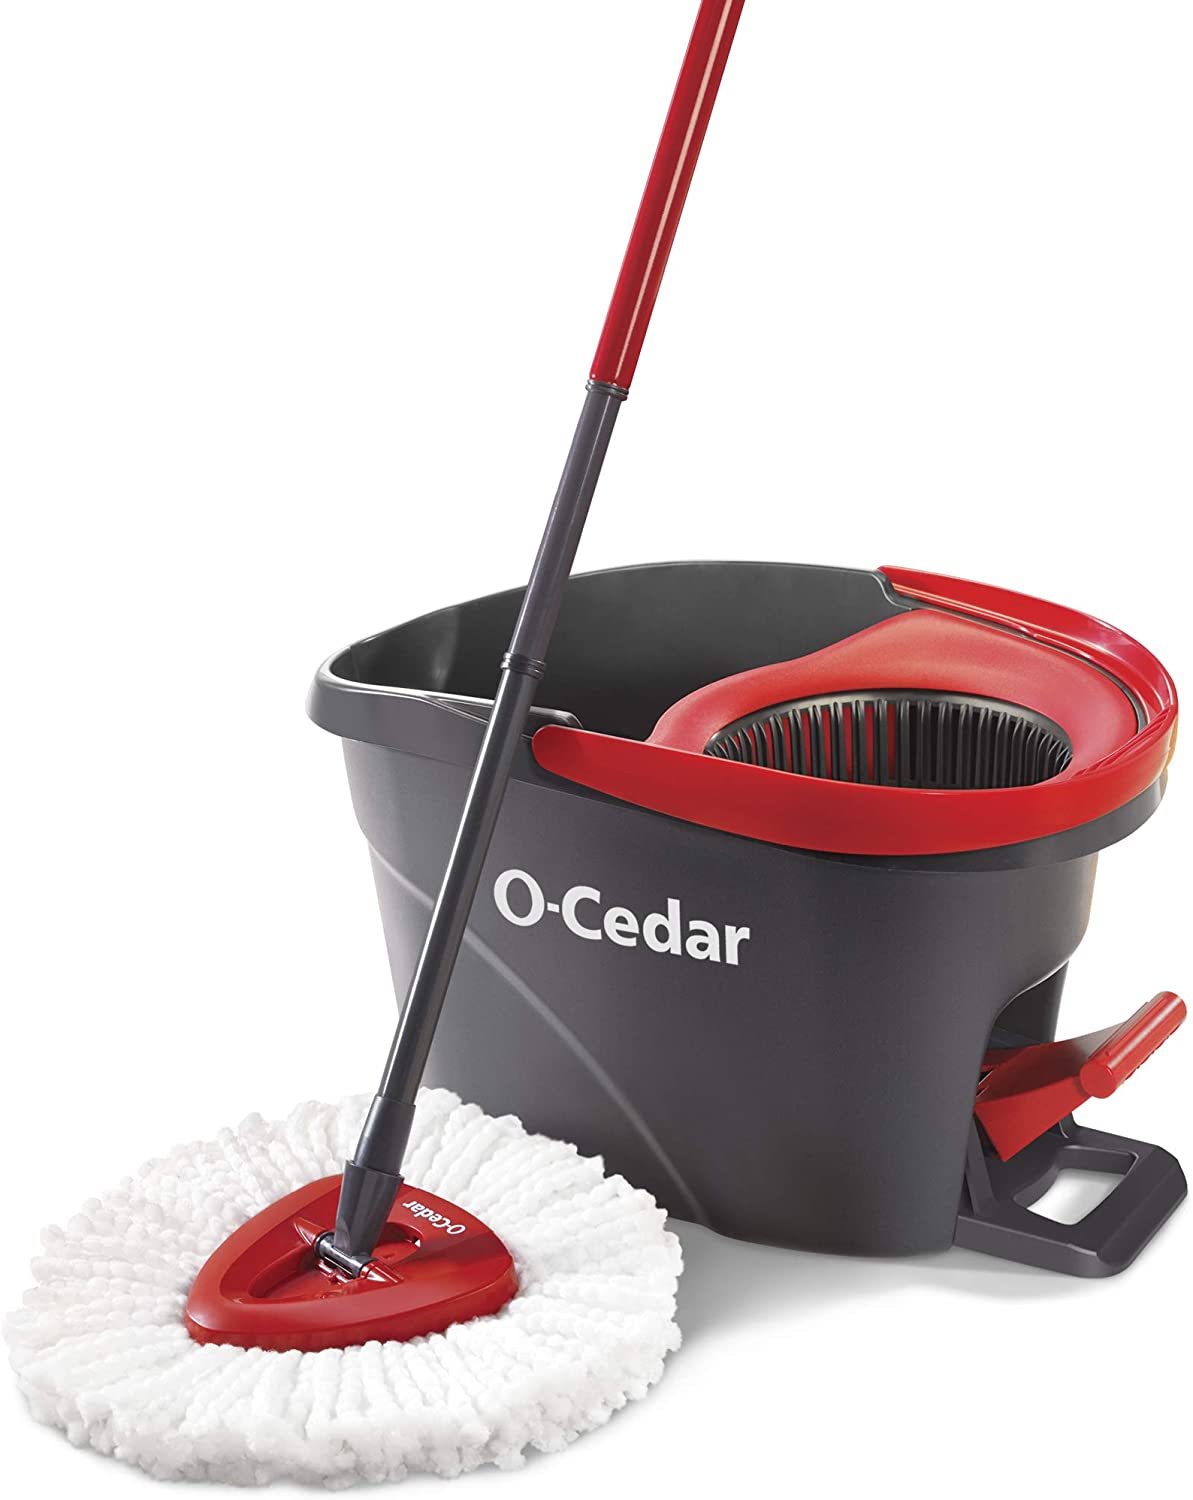 O-Cedar EasyWring Microfiber Spin Mop, Bucket Floor Cleaning System, Red, Gray 24